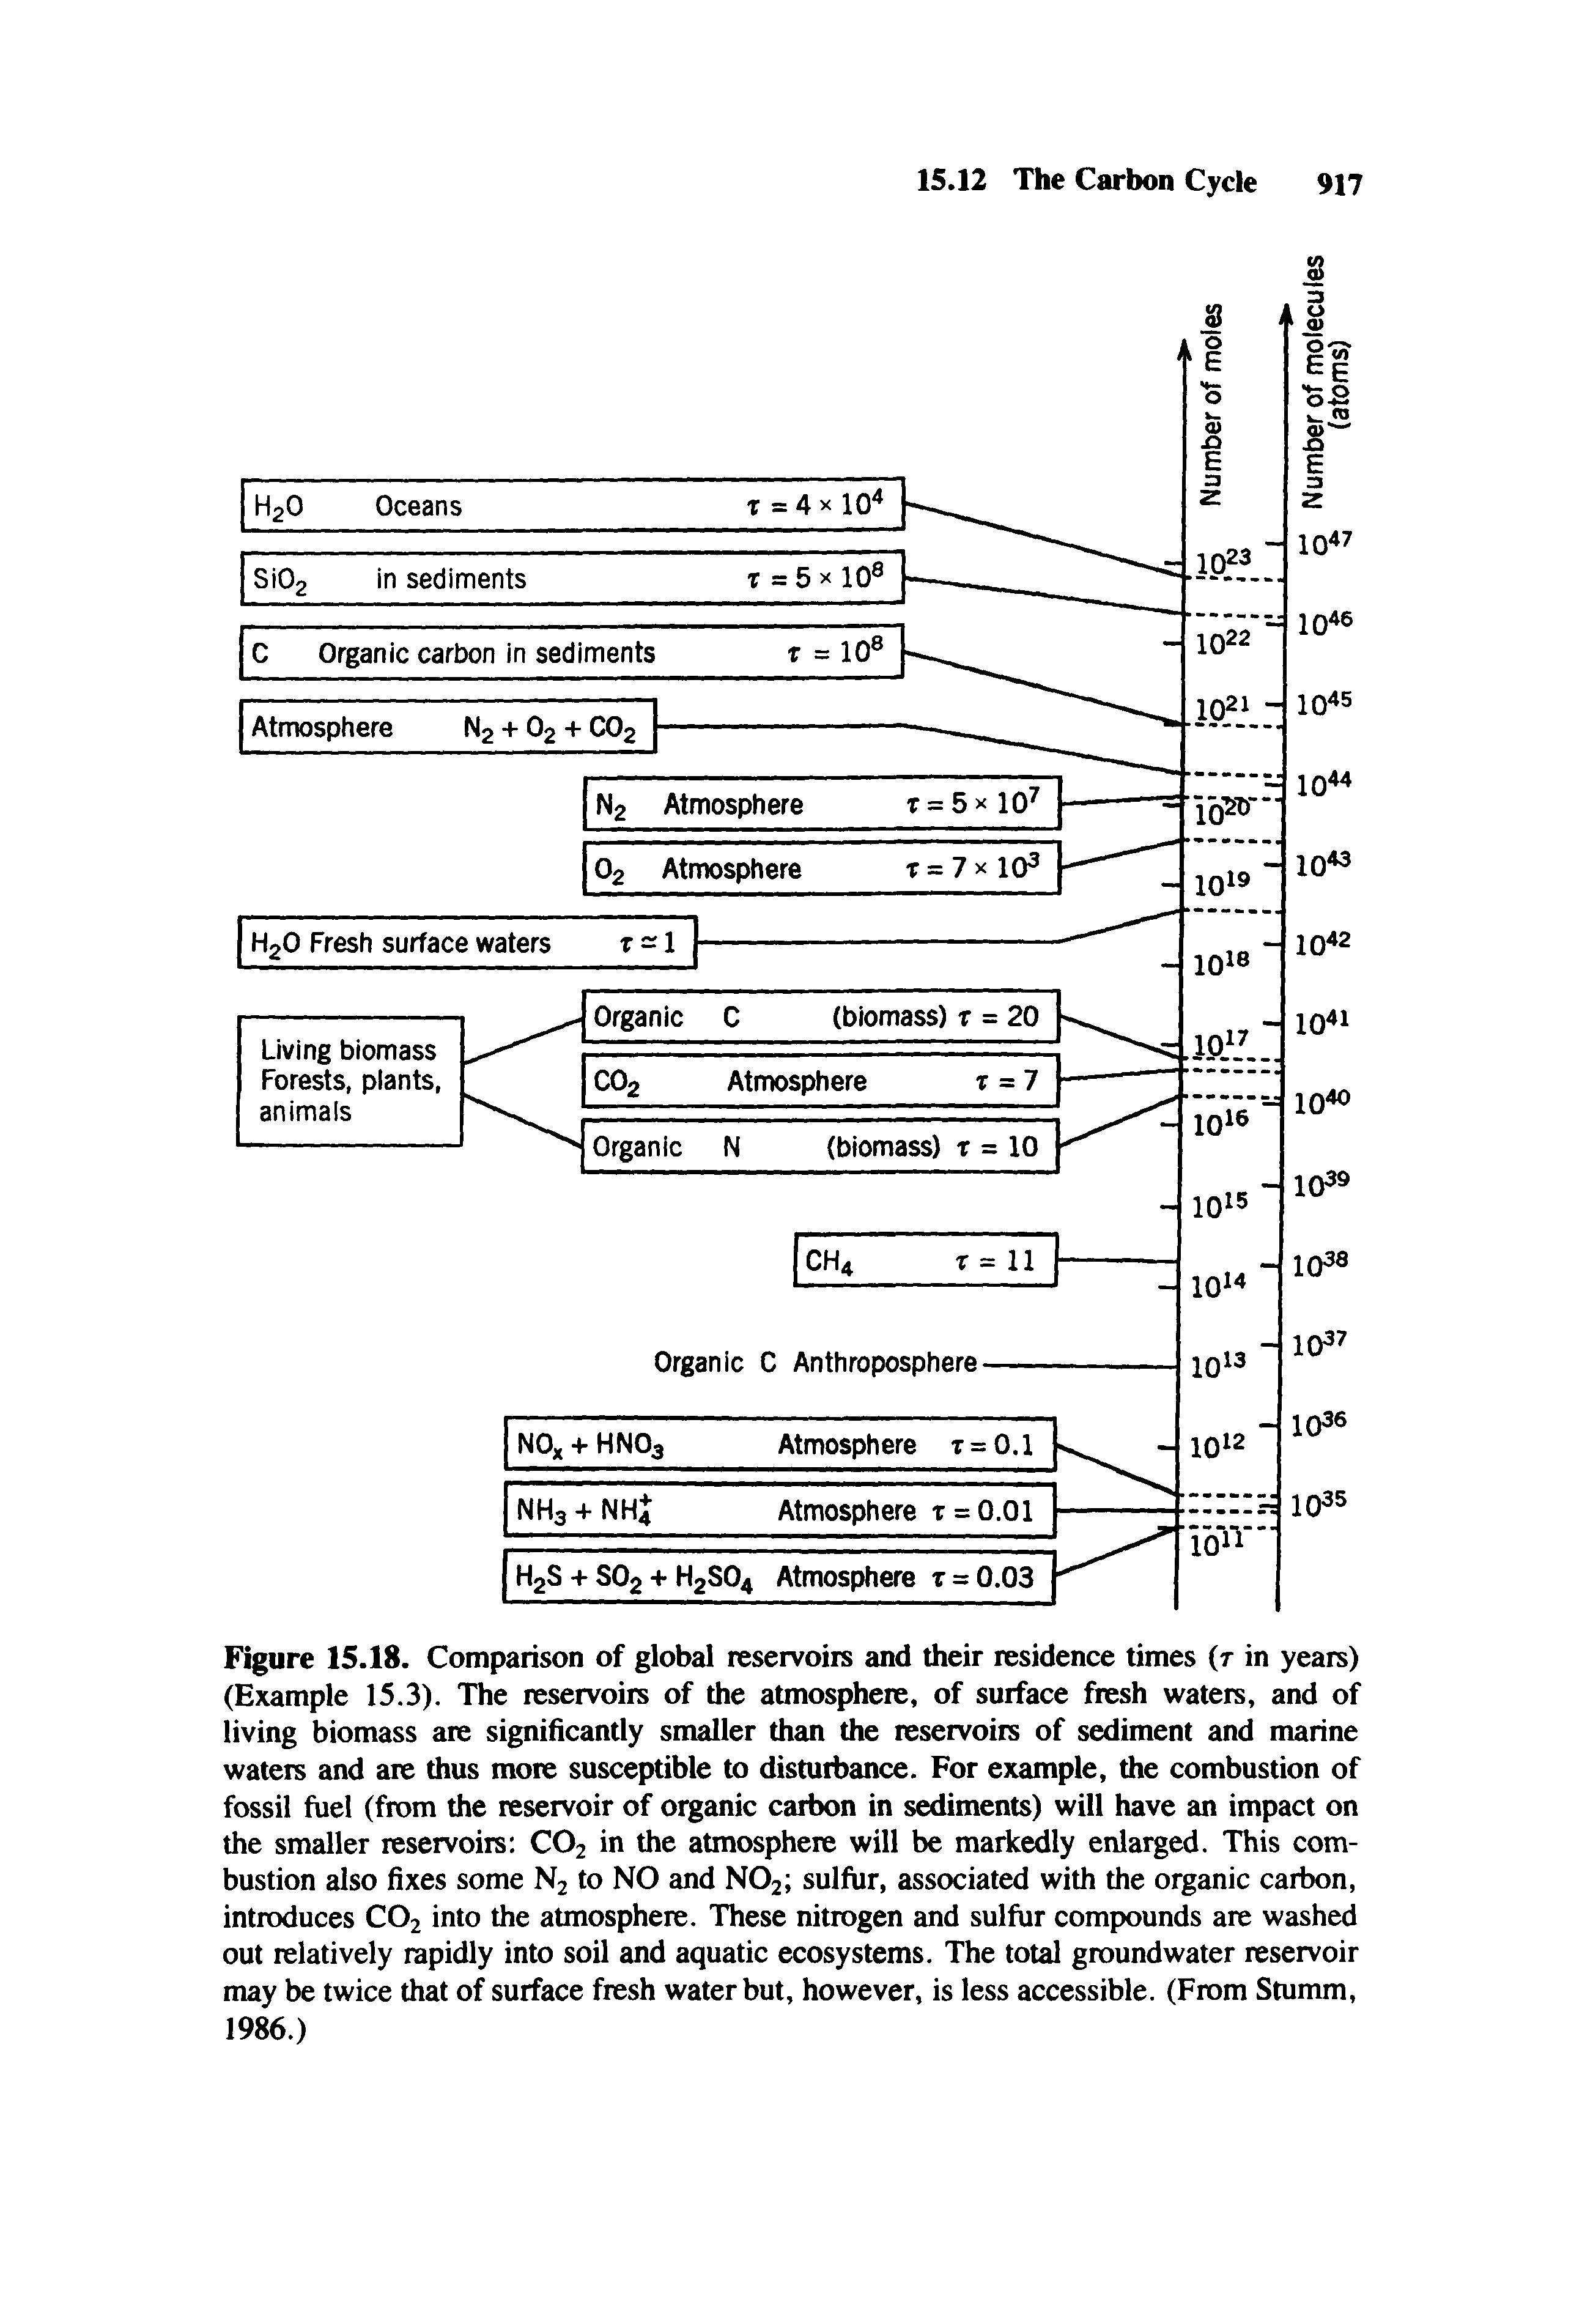 Figure 15.18. Comparison of global reservoirs and their residence times (t in years) (Example 15.3). The reservoirs of the atmosphere, of surface fresh waters, and of living biomass are significantly smaller than the reservoirs of sediment and marine waters and are thus more susceptible to distuibance. For example, the combustion of fossil fuel (from the reservoir of organic carbon in sediments) will have an impact on the smaller reservoirs CO2 in the atmosphere will be markedly enlarged. This combustion also fixes some N2 to NO and NO2 sulfur, associated with the organic carbon, introduces CO2 into the atmosphere. These nitrogen and sulfur compounds are washed out relatively rapidly into soil and aquatic ecosystems. The total groundwater reservoir may be twice that of surface fresh water but, however, is less accessible. (From Stumm, 1986.)...